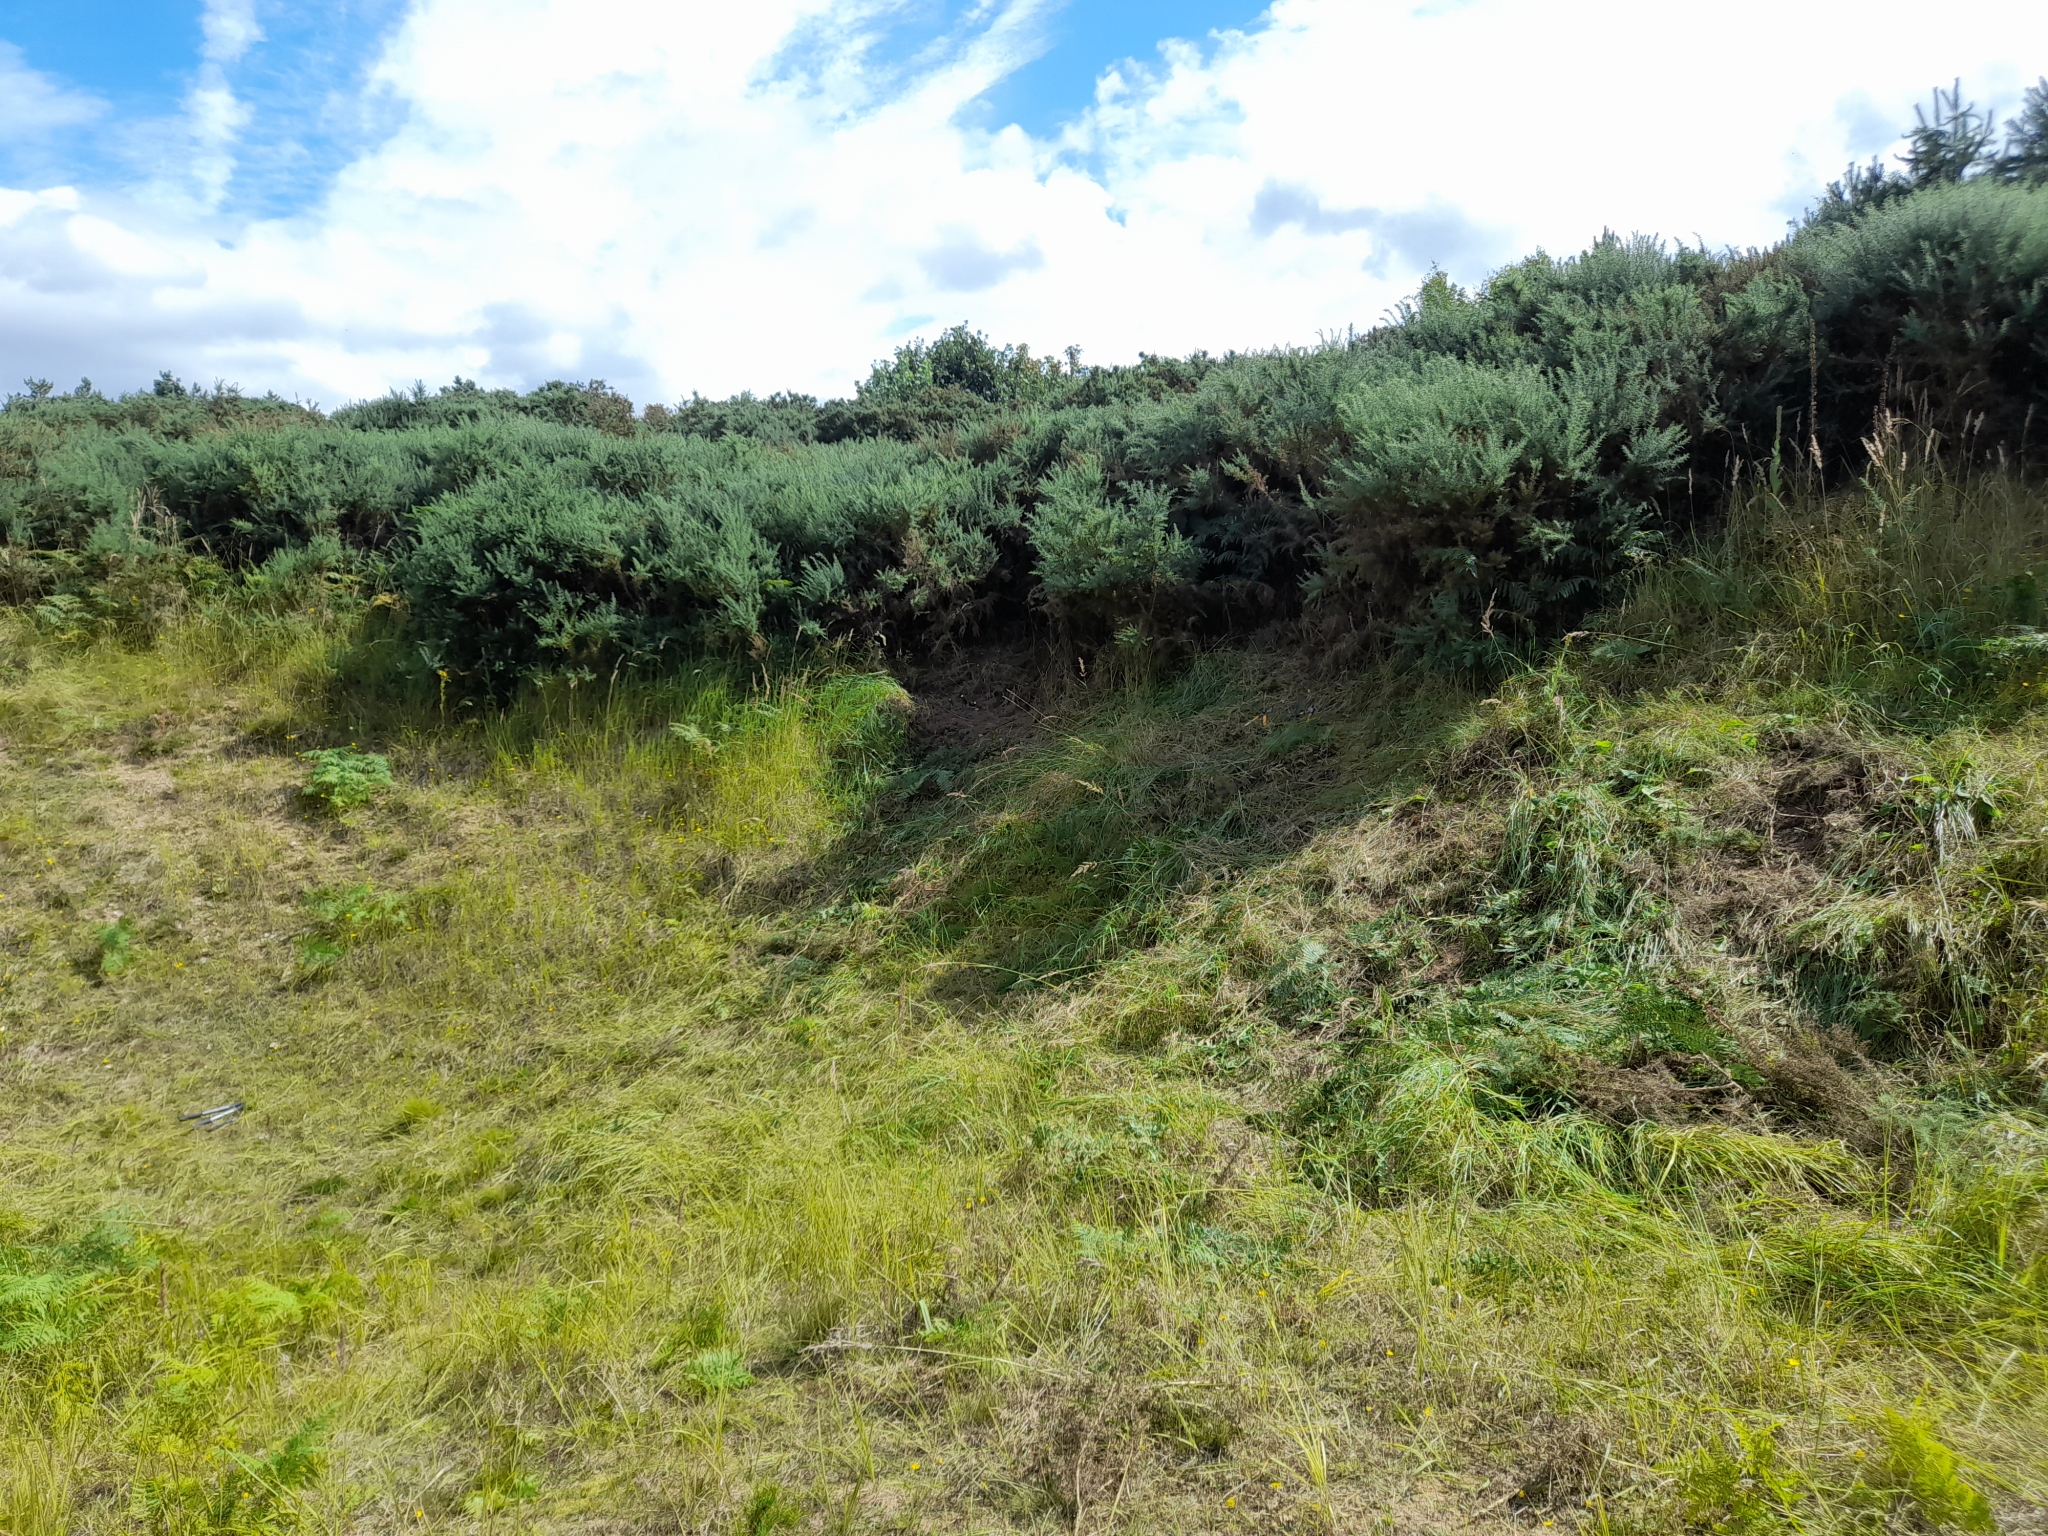 A photo from the FoTF Conservation Event - August 2021 - Maintenance tasks at Mildenhall Mugwort Pit & Mildenhall Warren Lodge : A shot of one of the slopes of the Mugwort pit where it is clear the impact the volunteers efforts have made